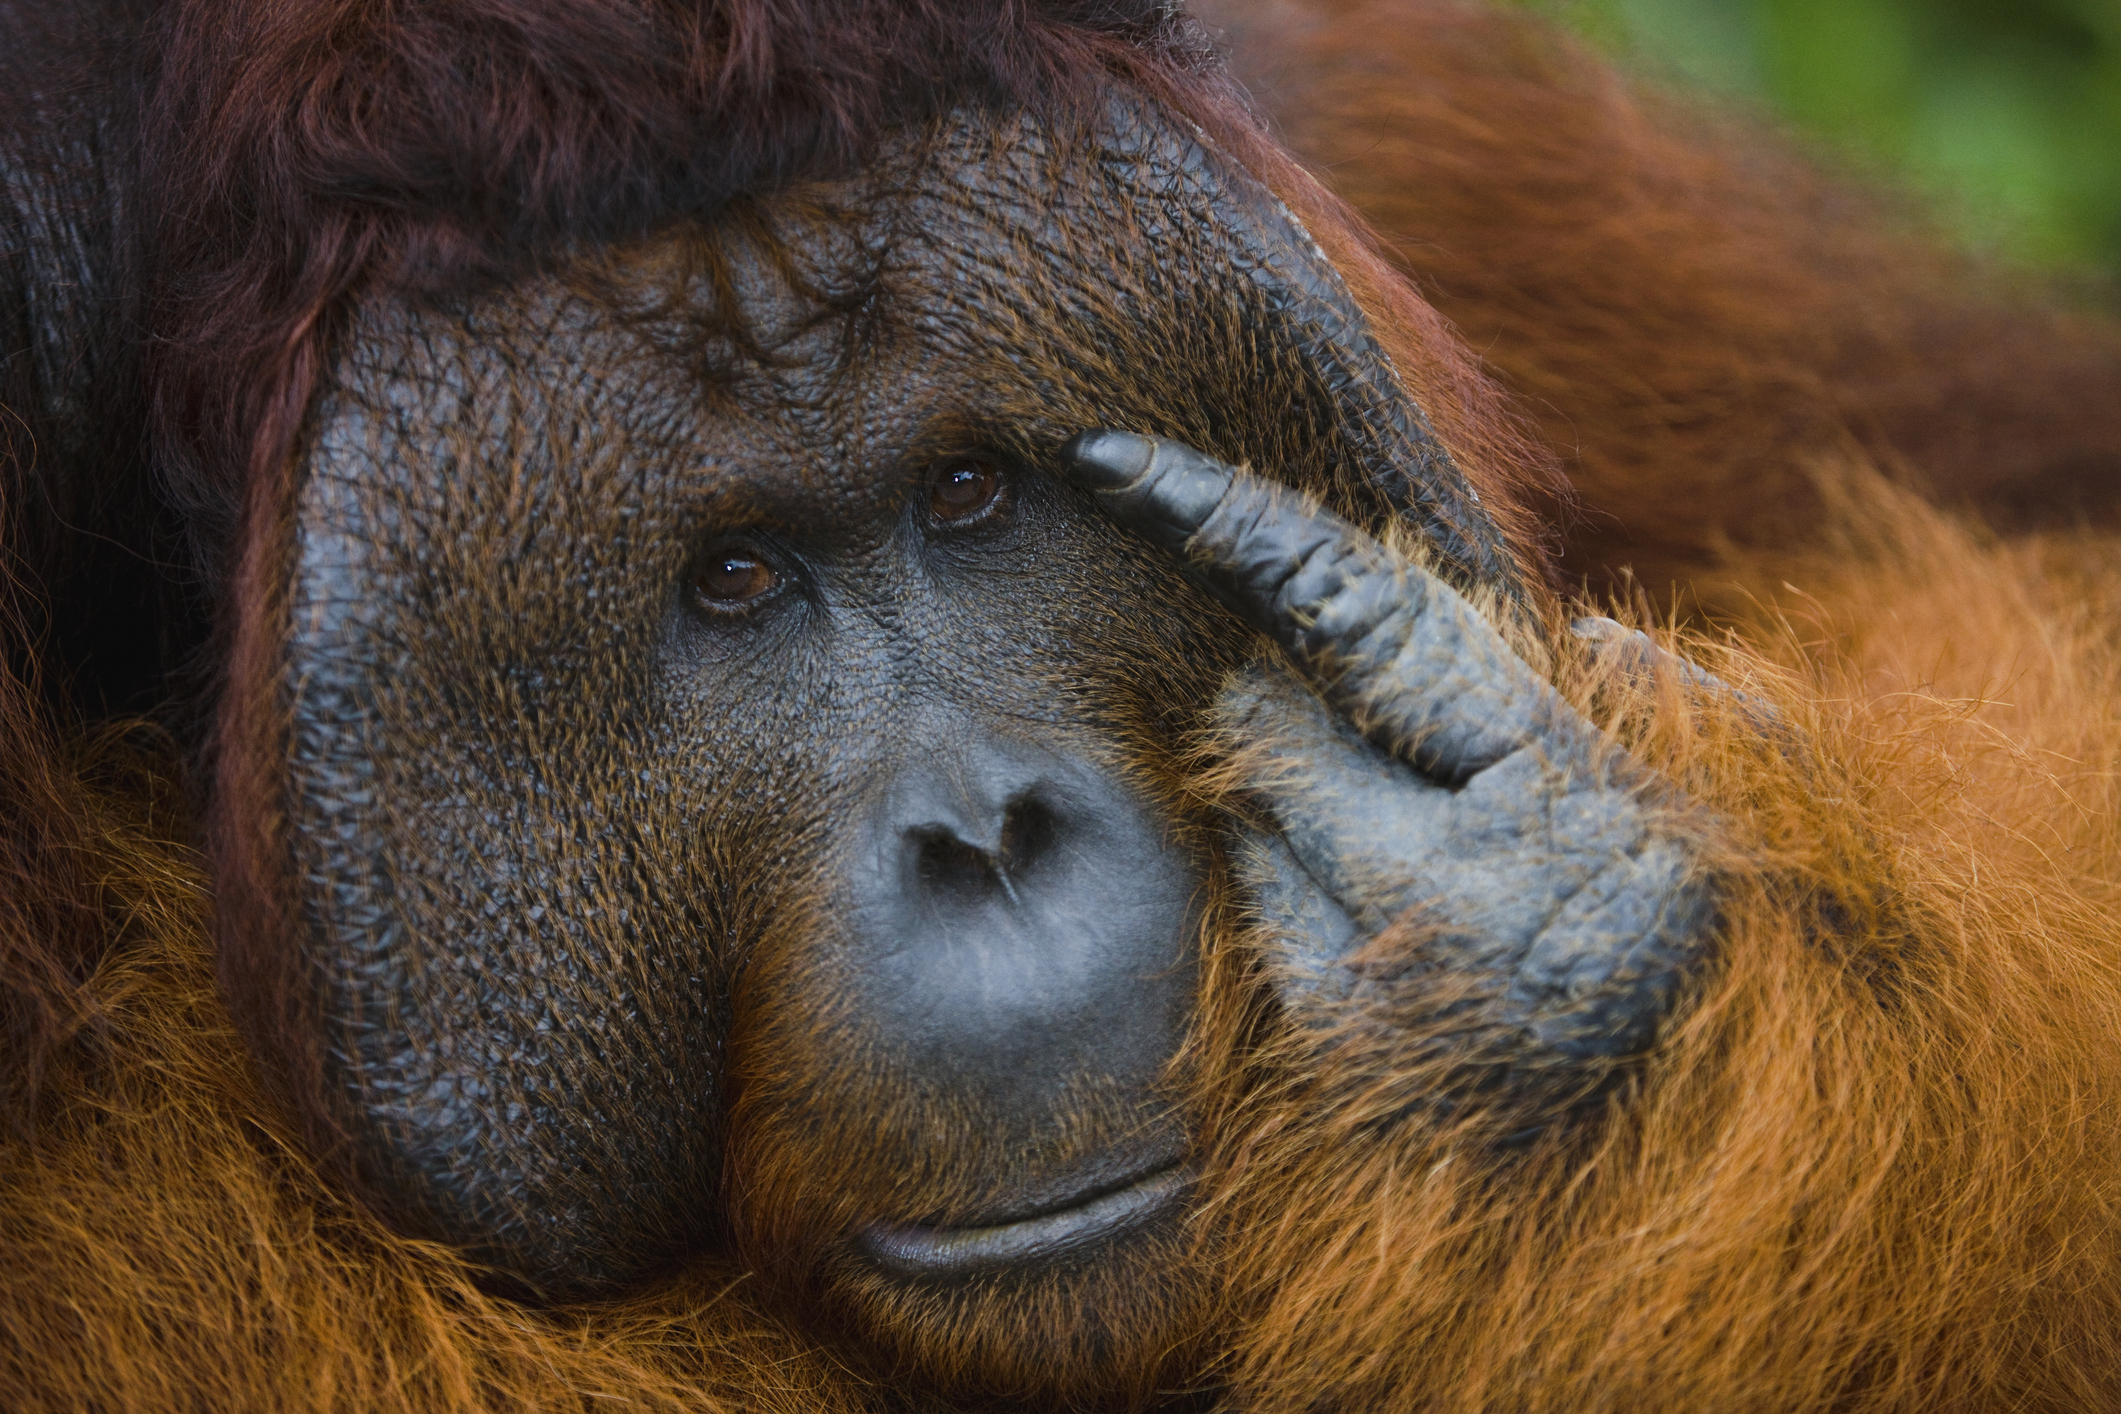 Dominant male orangutan (Pongo pygmaeus) with large cheek flaps pointing his finger at his face, Borneo, Indonesia.